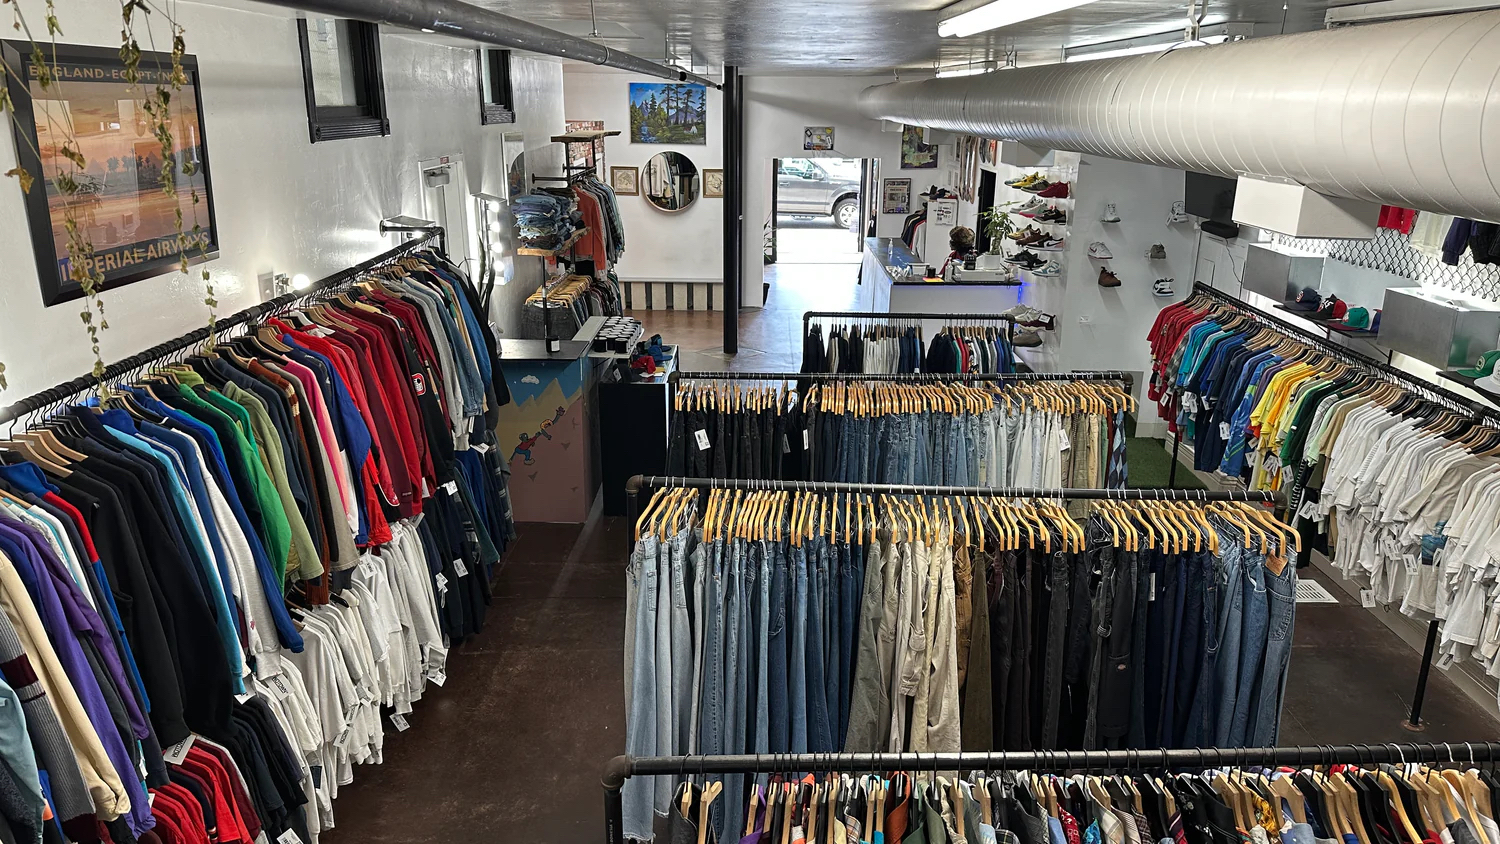 Interior of Wotwon Vintage thrift store in East Village, San Diego featuring racks of secondhand clothing, sneakers, and other collectibles